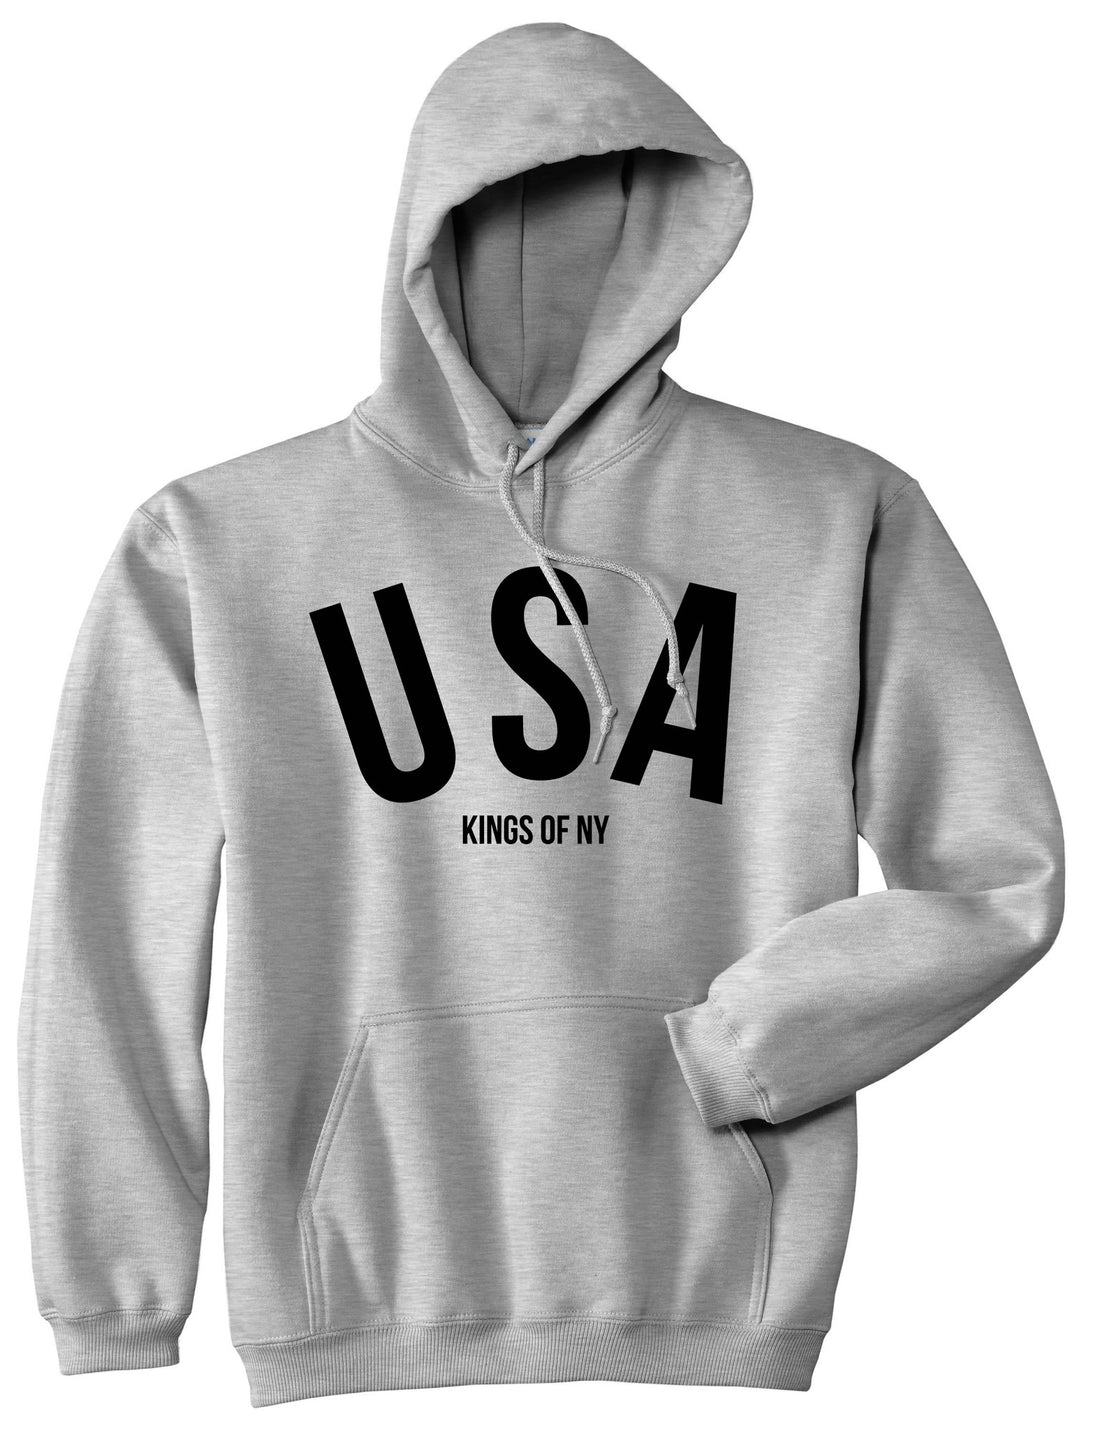 USA Pullover Hoodie Hoody in Grey by Kings Of NY